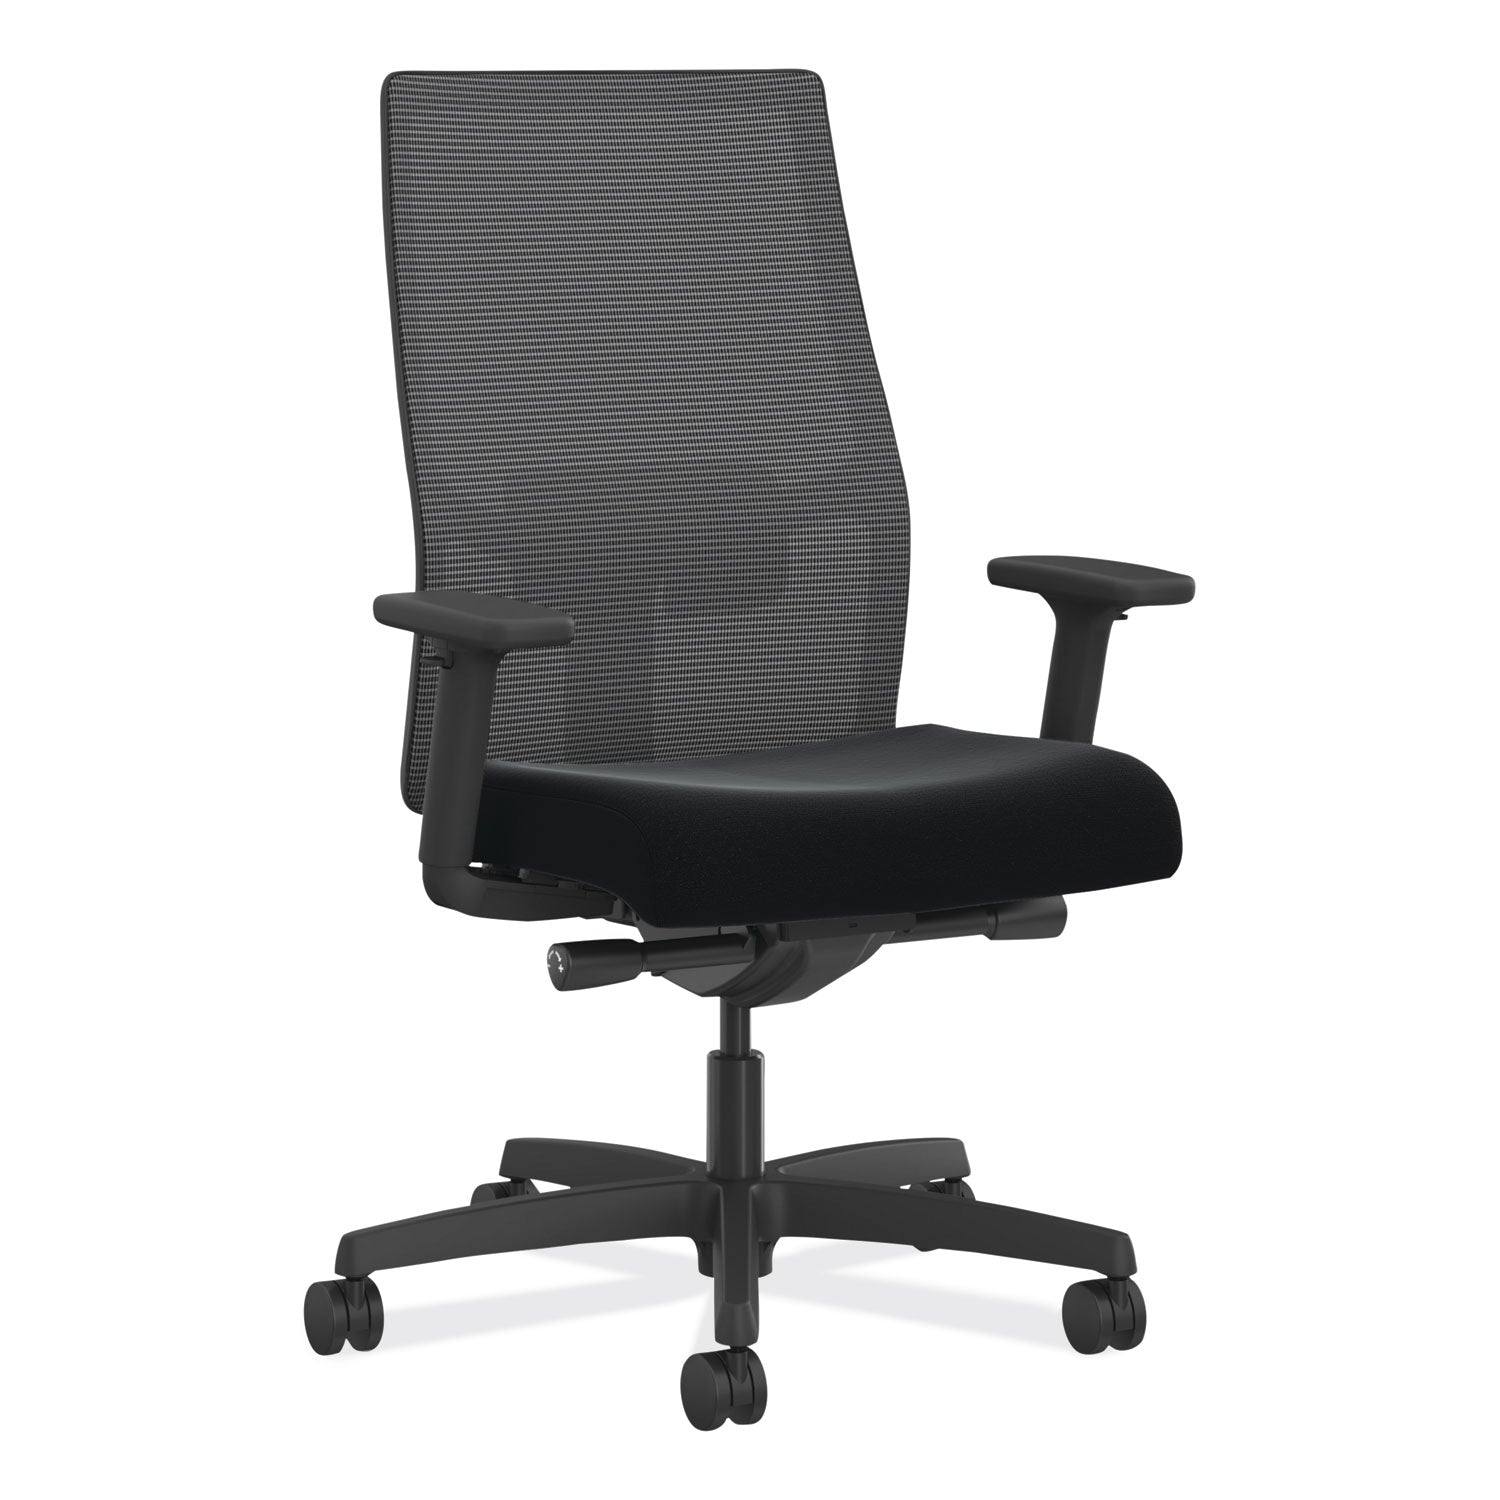 ignition-20-4-way-stretch-mid-back-mesh-task-chair-red-adjustable-lumbar-support-black-ships-in-7-10-business-days_honi2mm2amc10yt - 1